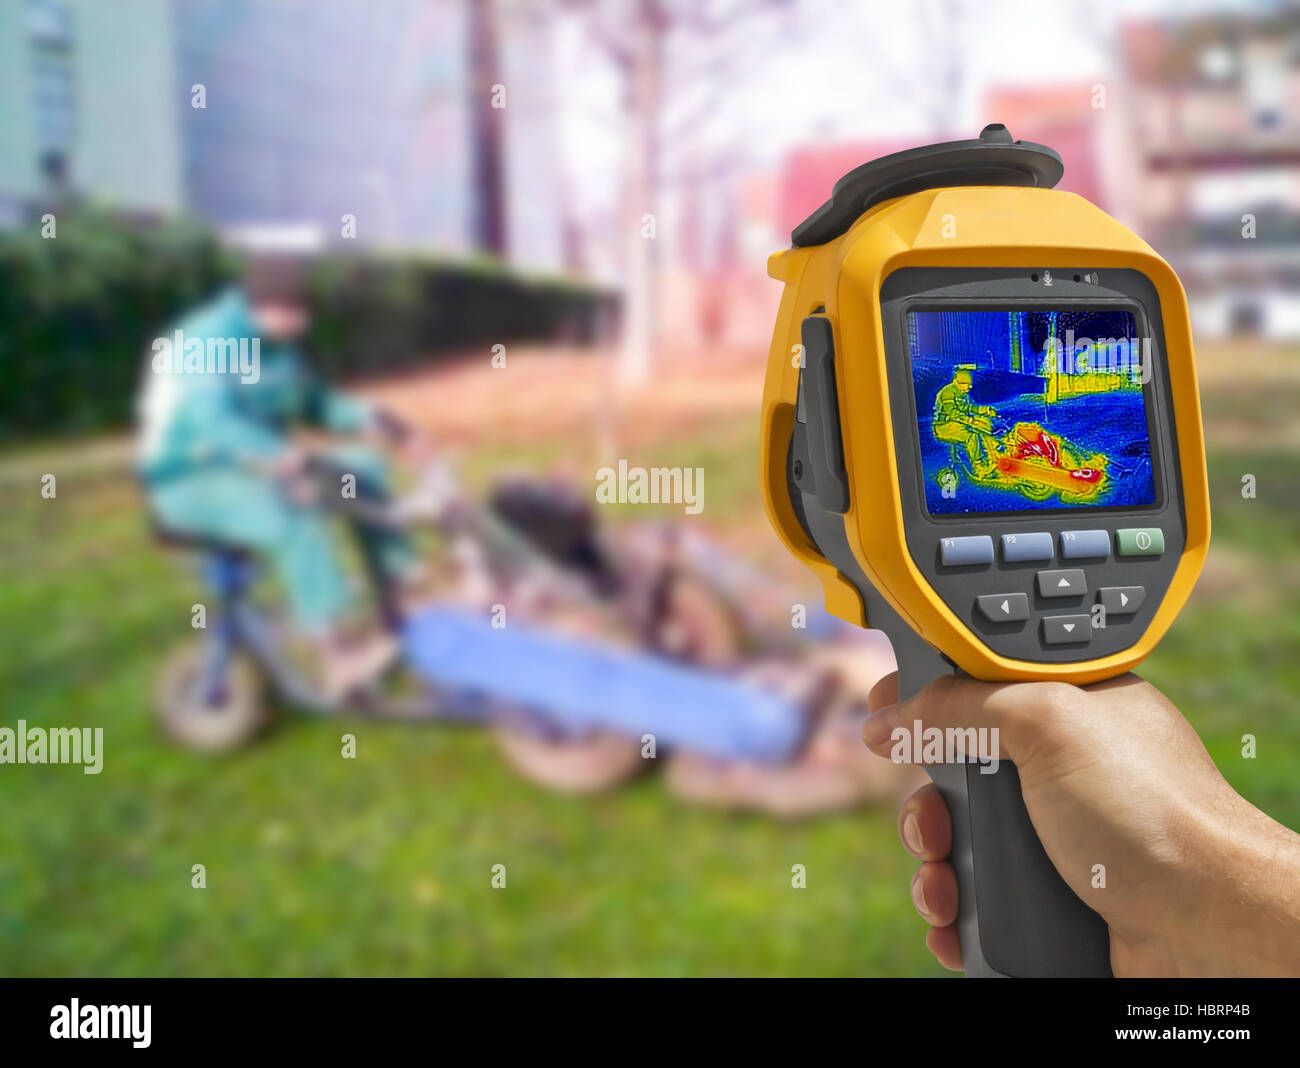 Recording with Thermal camera workers cutting grass in city park Stock Photo